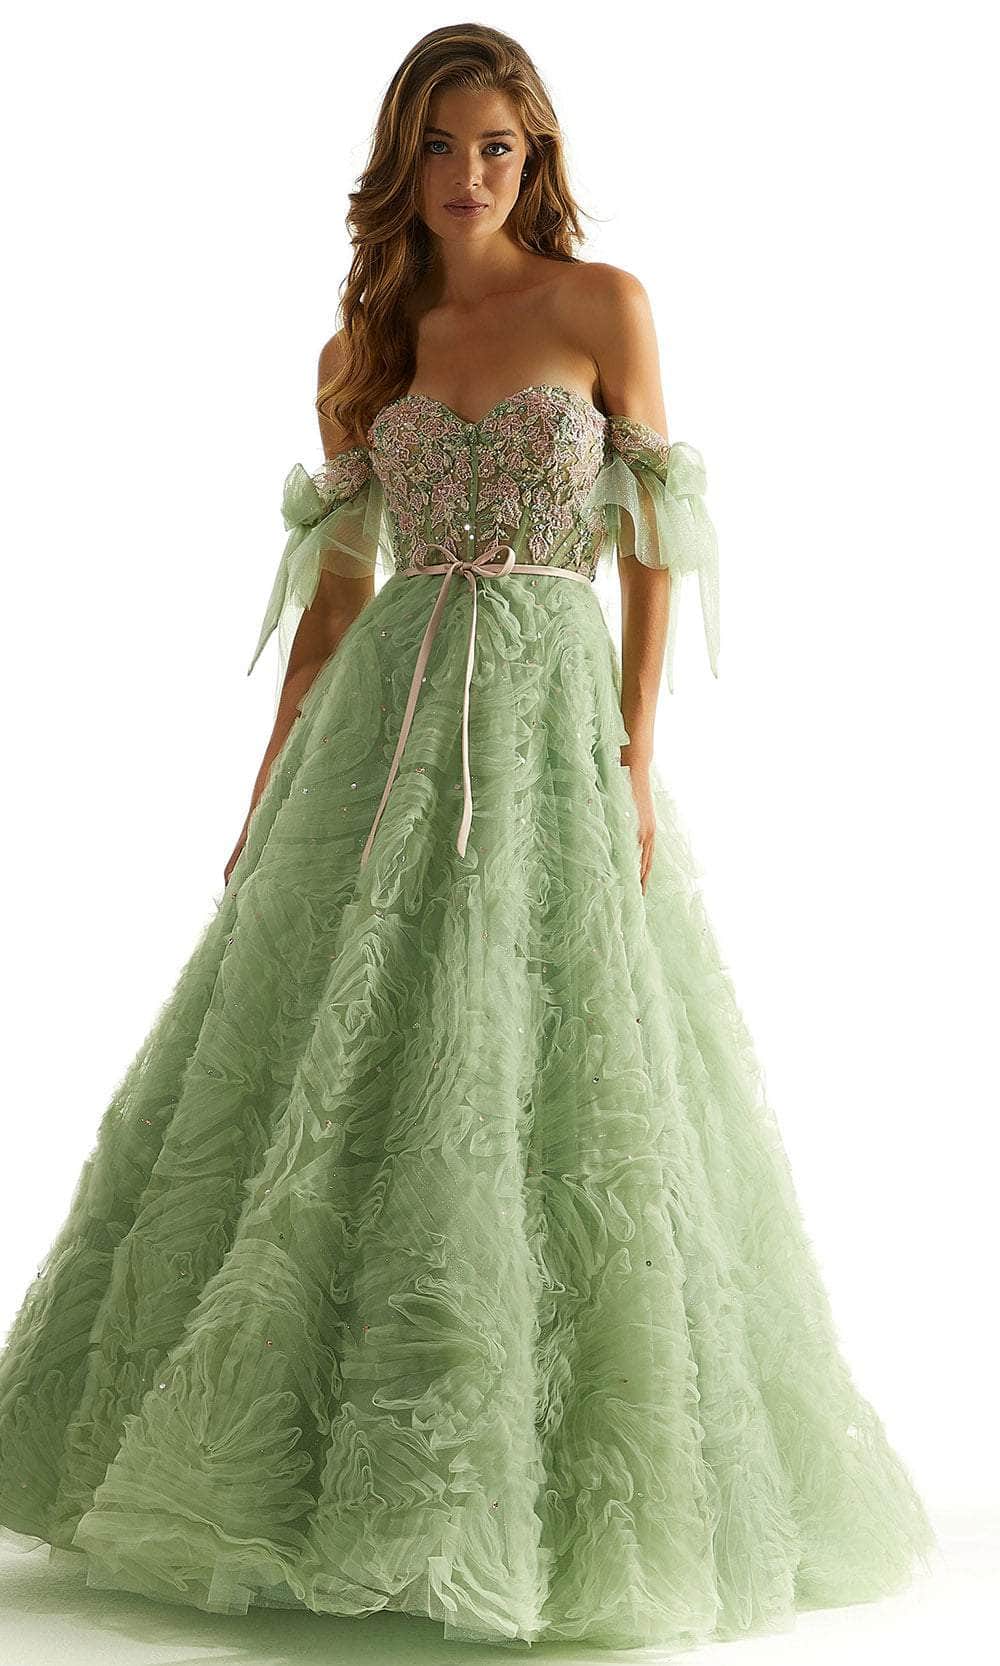 Image of Mori Lee 49068 - Floral Ruffle Prom Dress